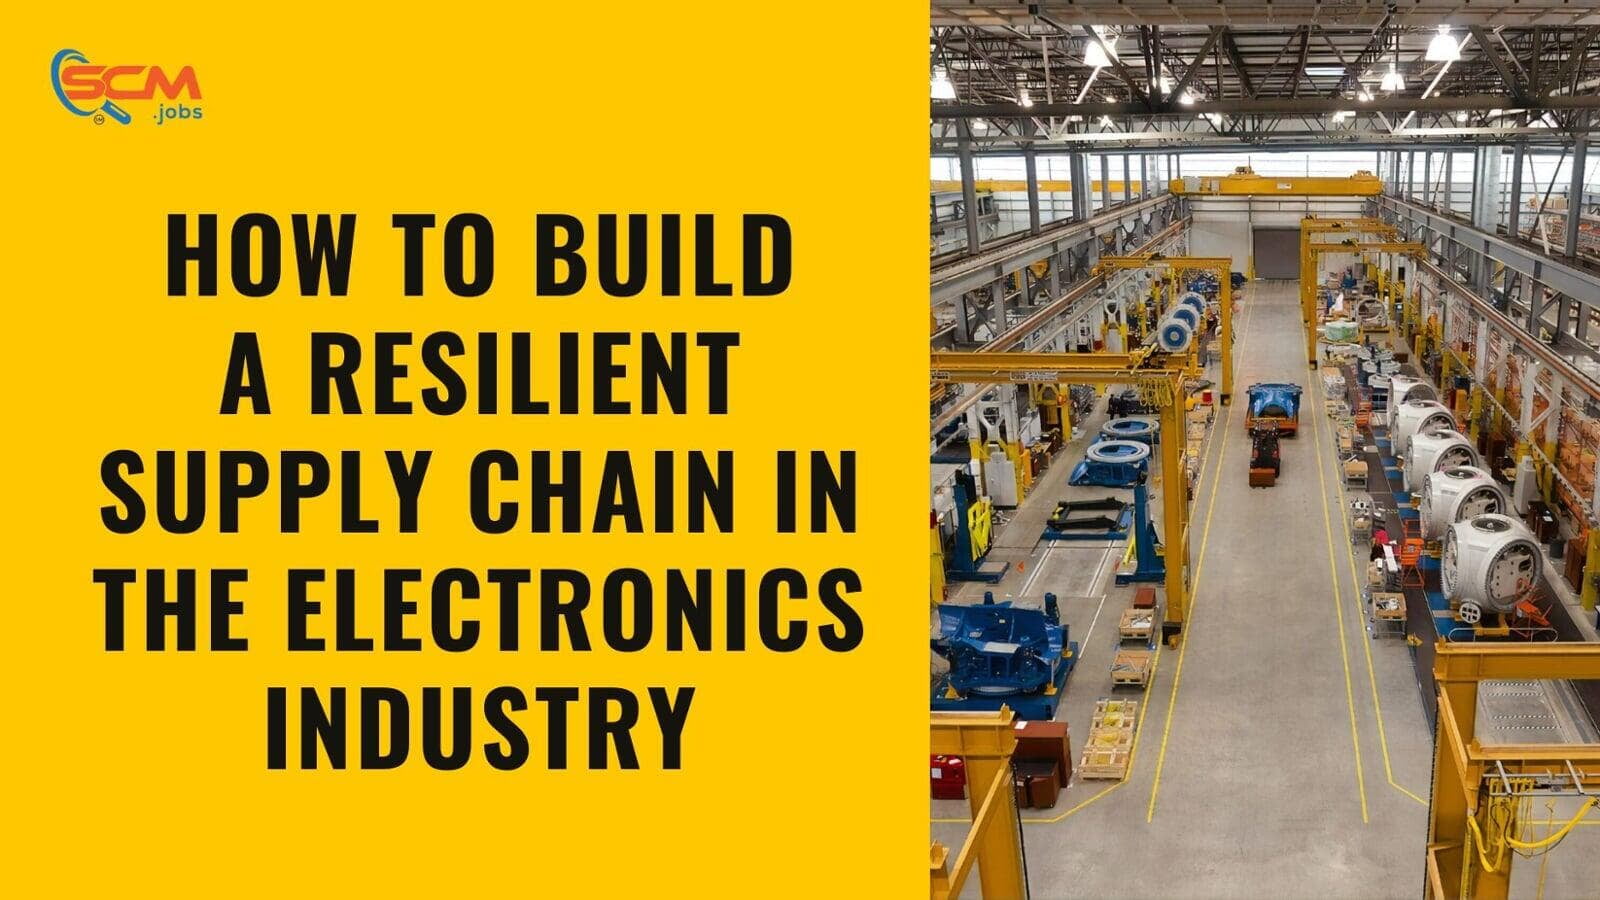 How to Build a Resilient Supply Chain in the Electronics Industry